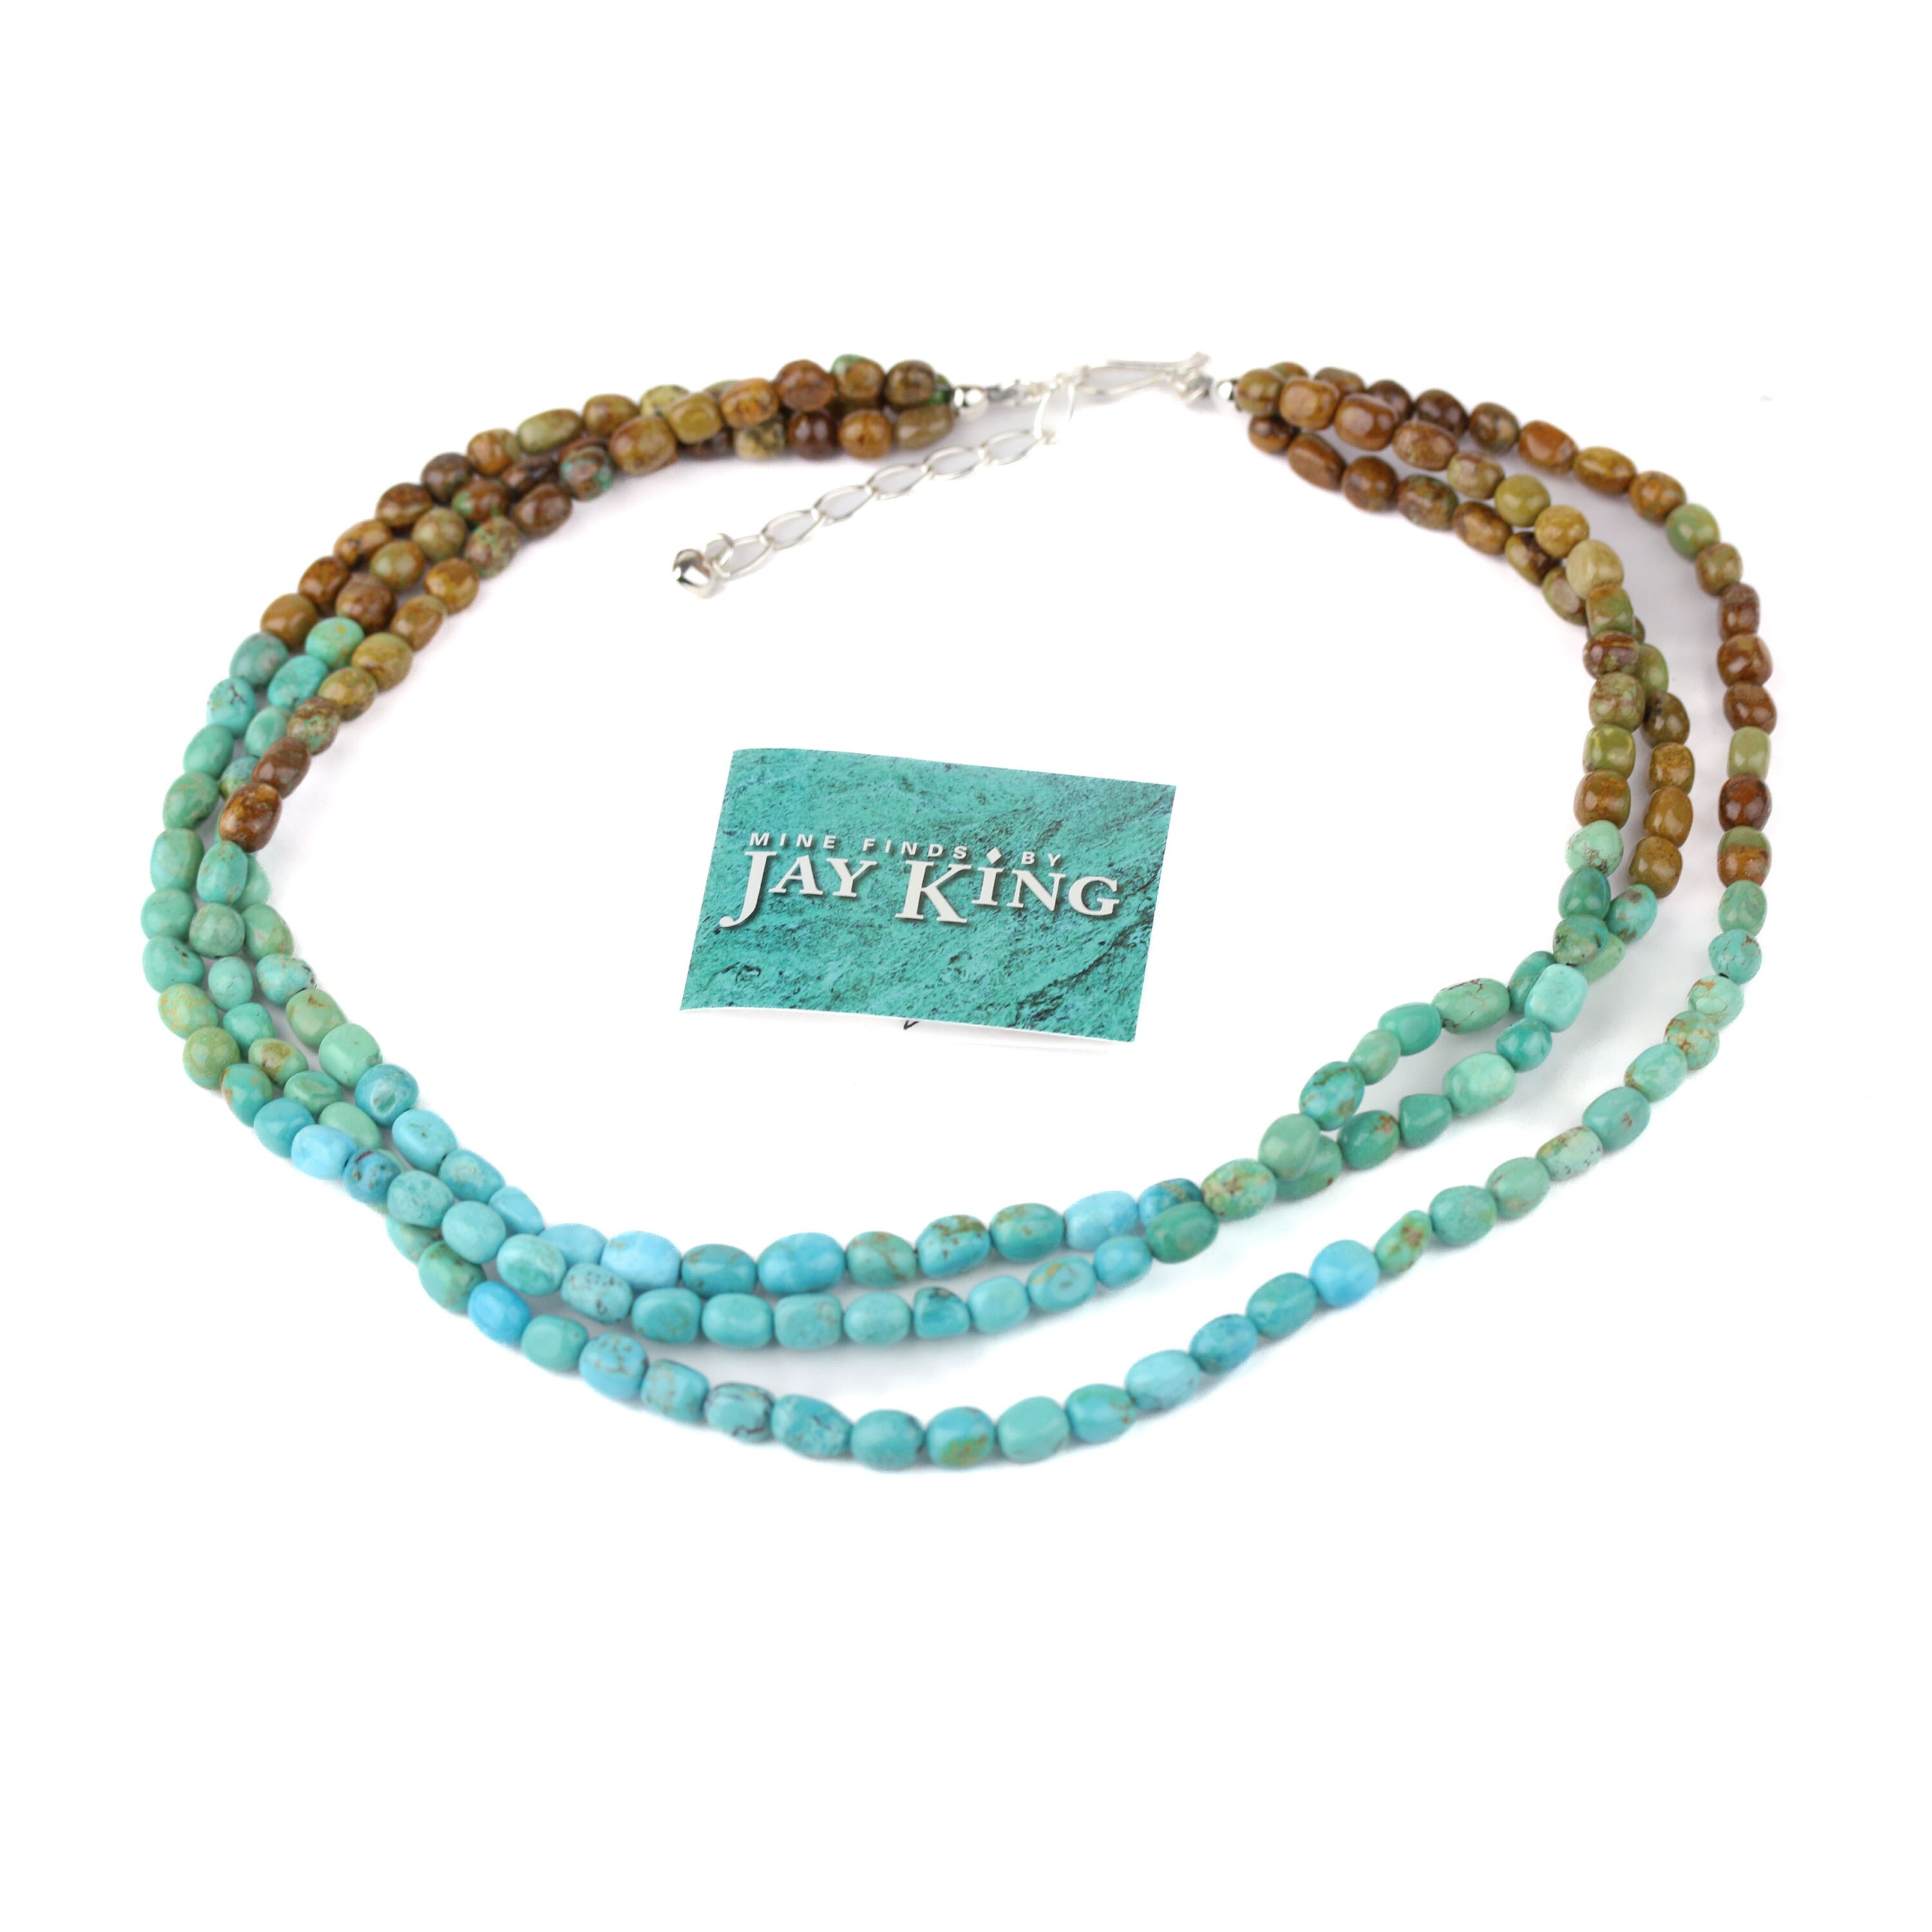 Jay King Sterling Silver Turquoise Composite Bead Coil Wrap Bracelet